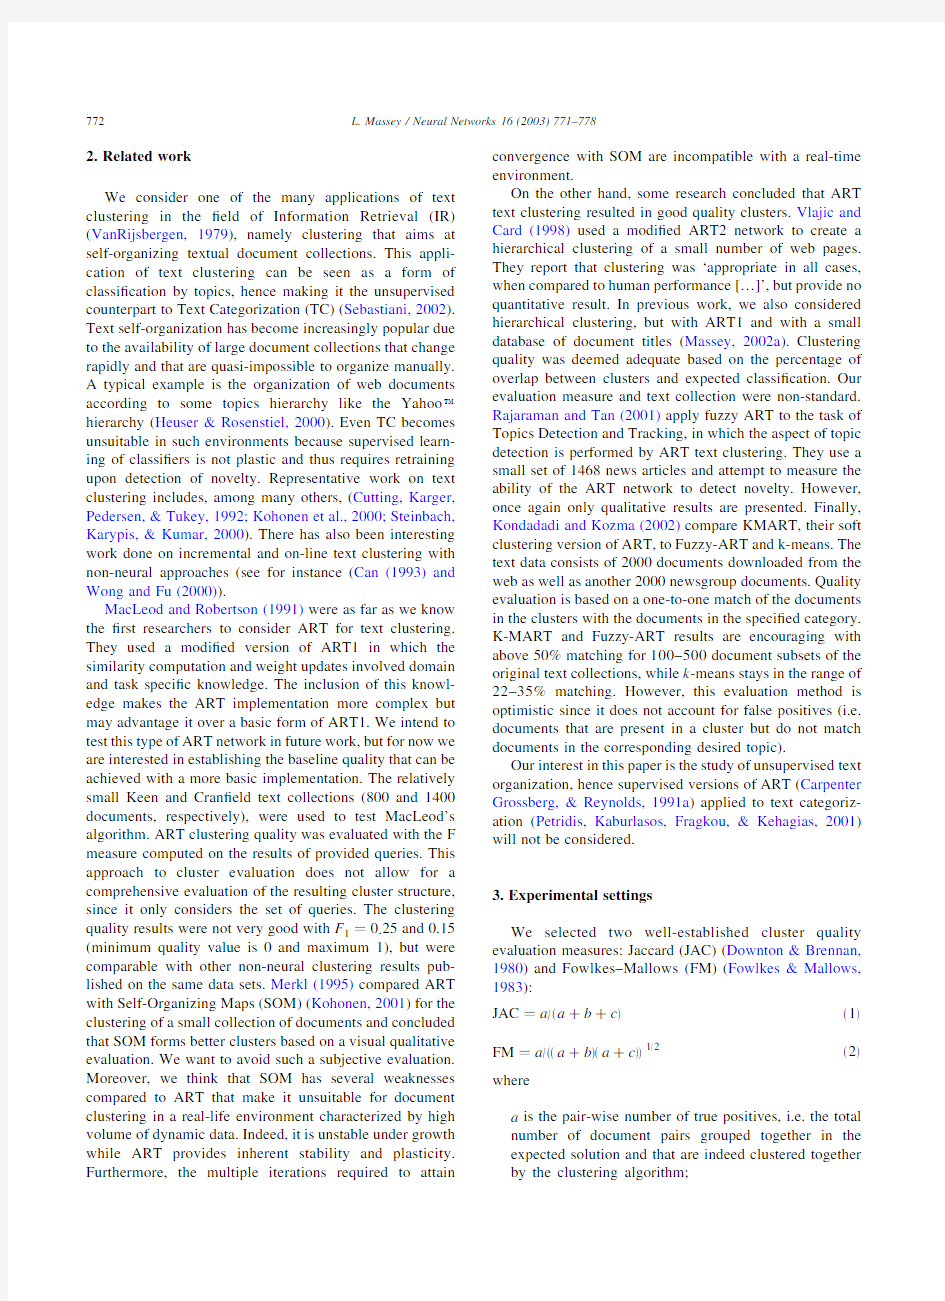 2003 Special issue On the quality of ART1 text clustering